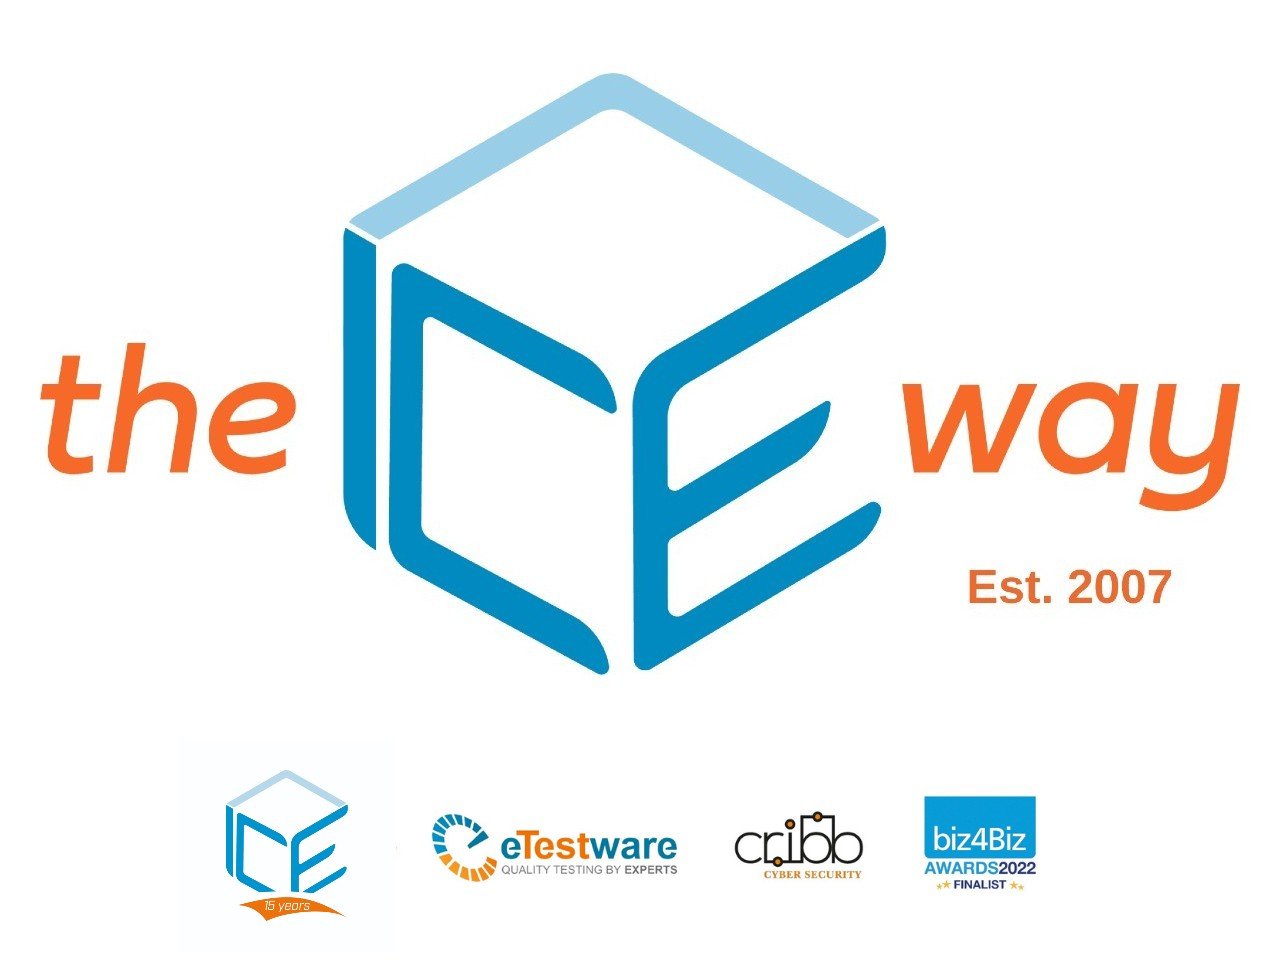 15 Years of theICEway – from ICE to an ecosystem